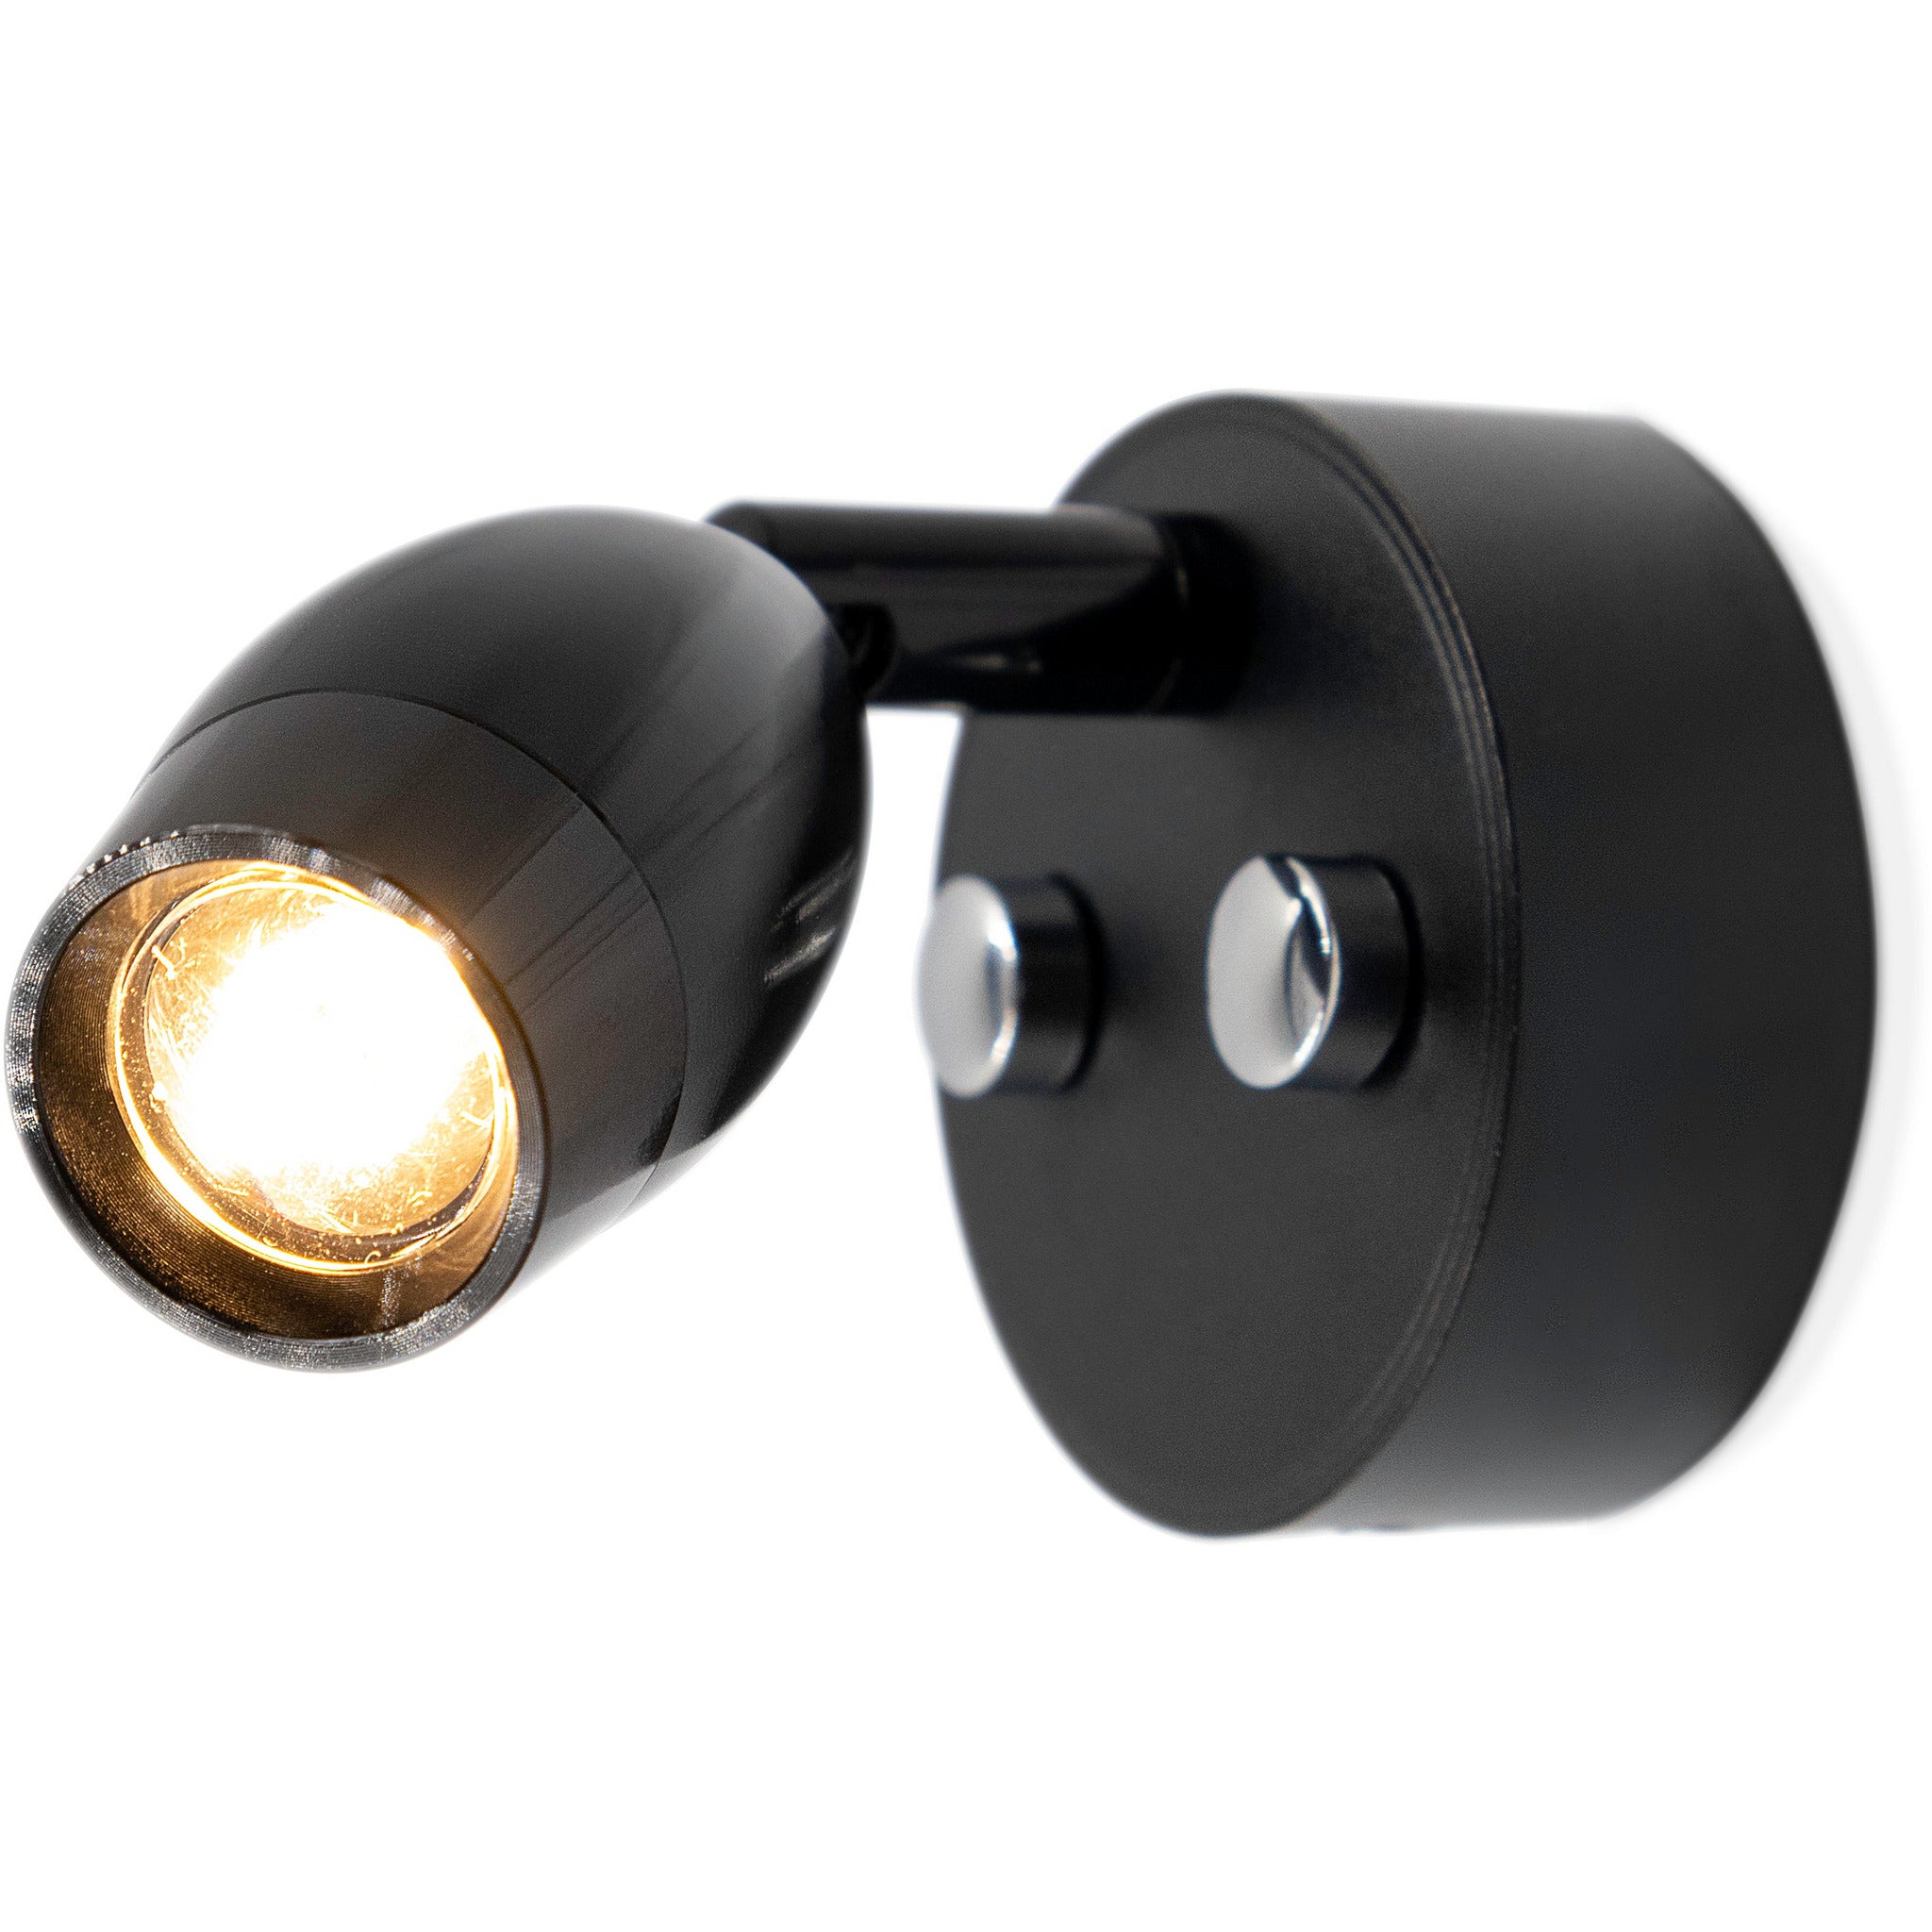 Black LED 300mm Spotlight with USB - Dimmable, Touch On/Off (Warm White) Kiravans 